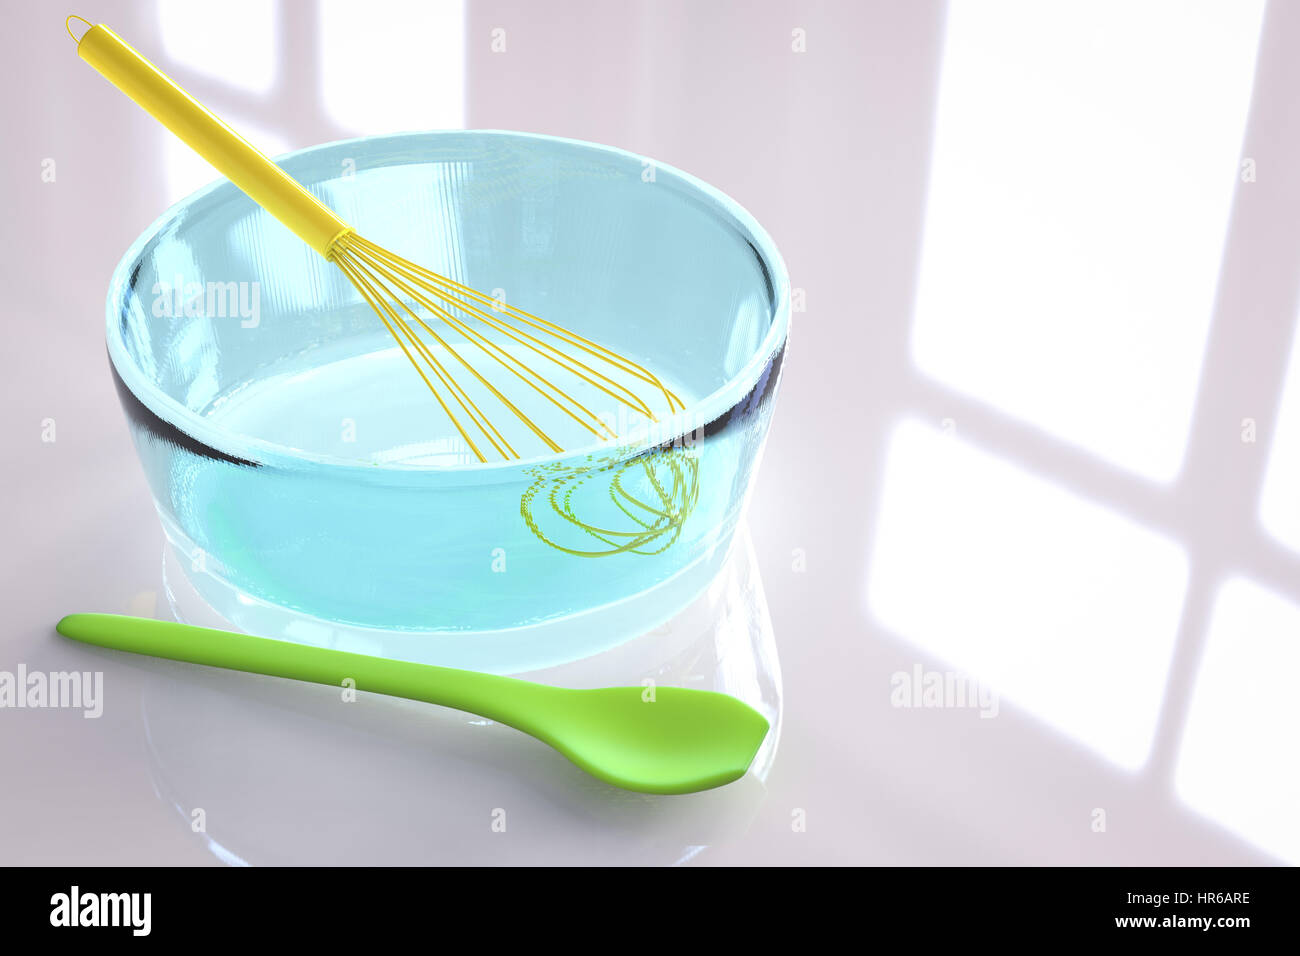 3d rendering wire whisk in a bowl Stock Photo